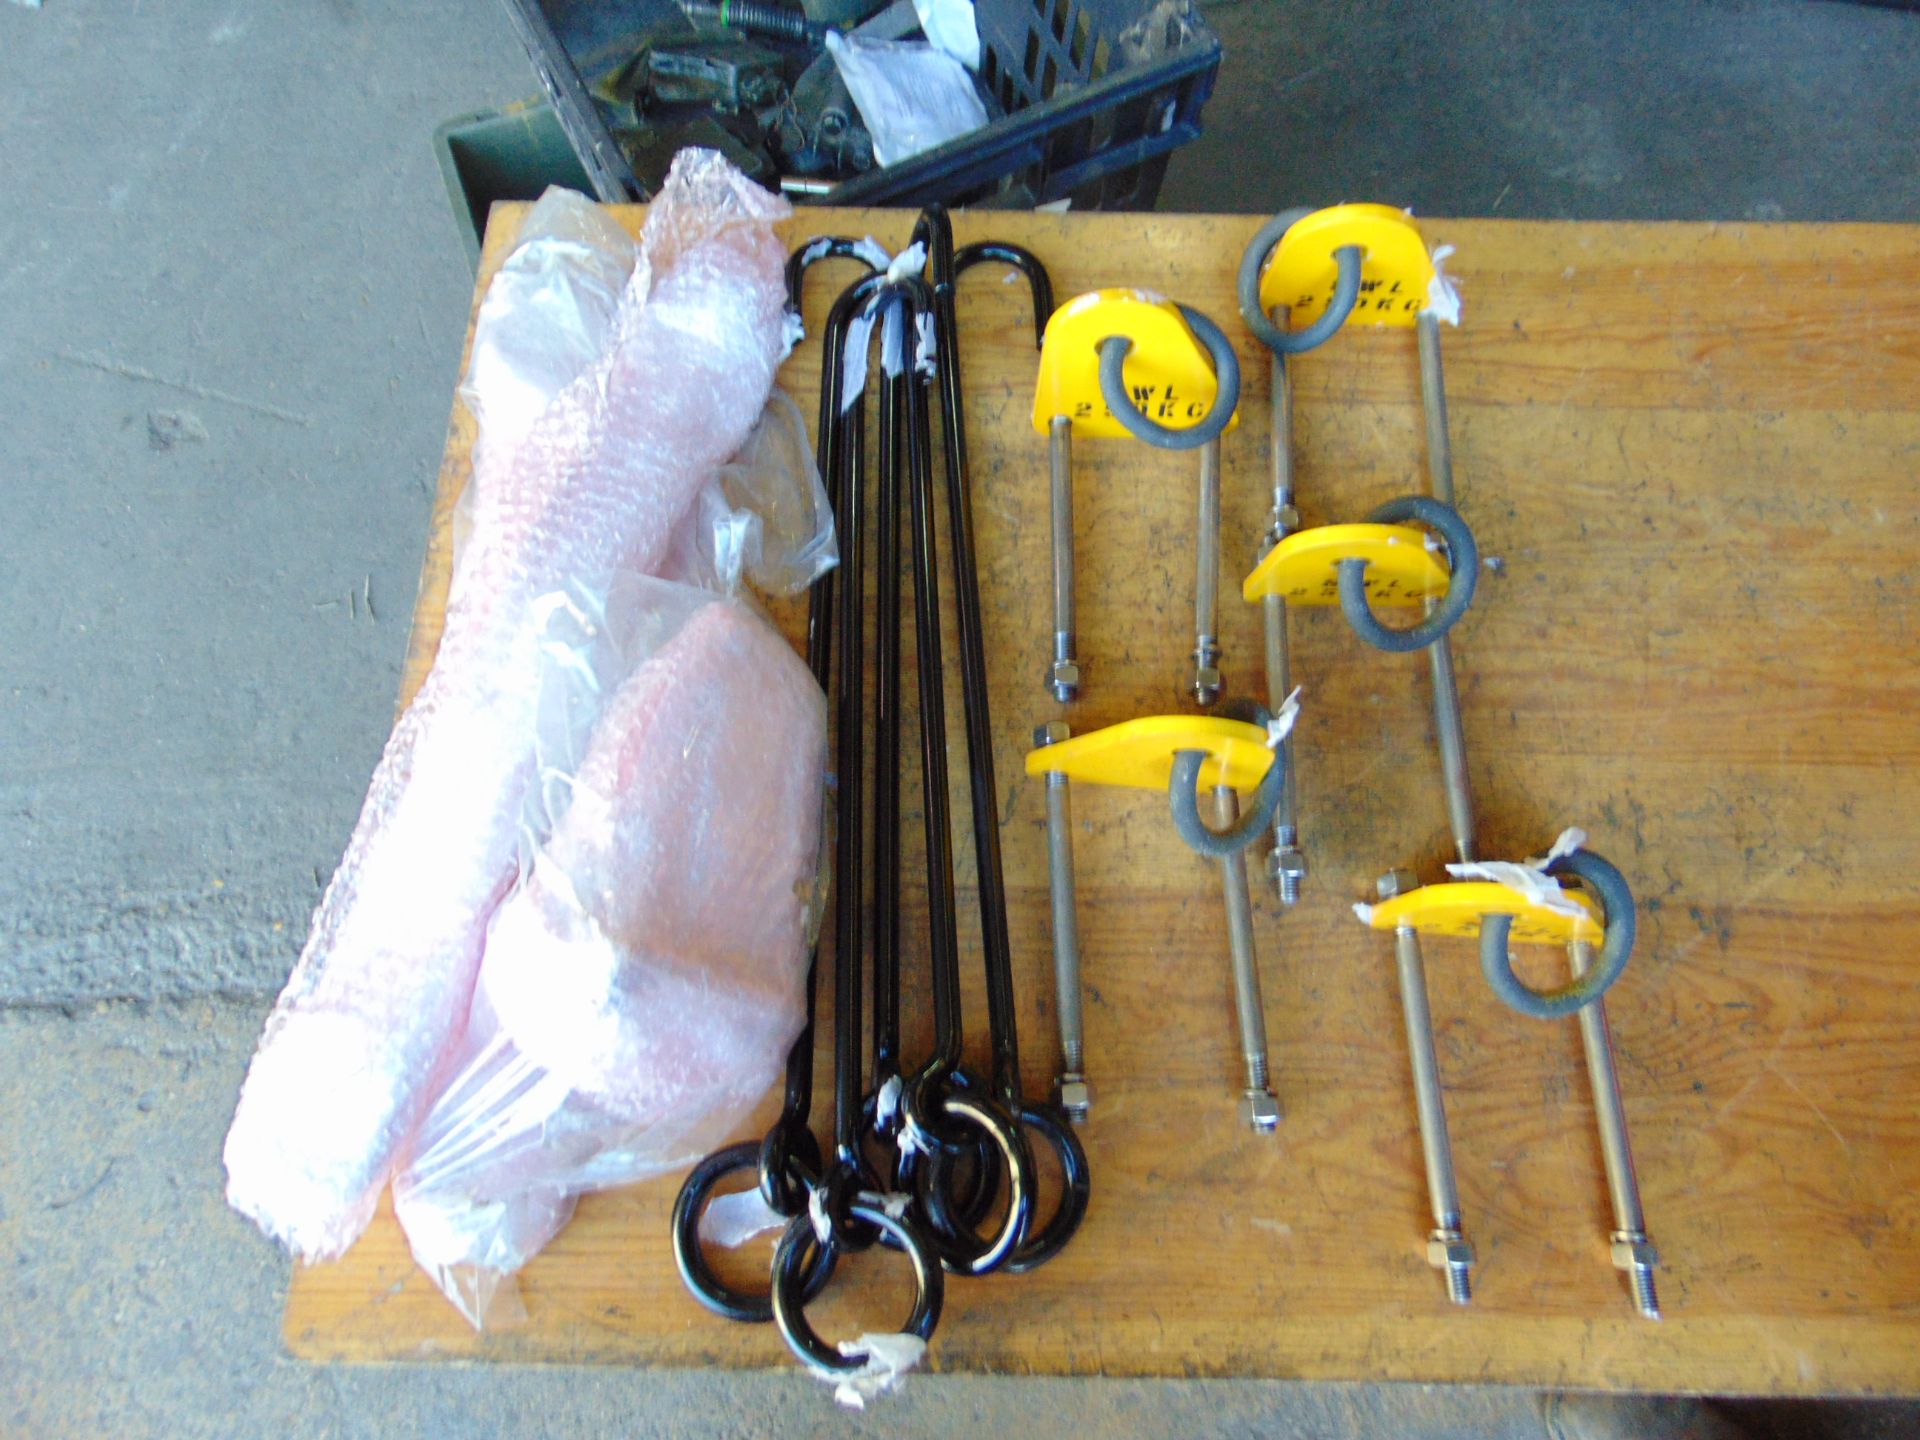 6 x New Unissued Transfer Gearbox Lifting Equipment - Image 2 of 4